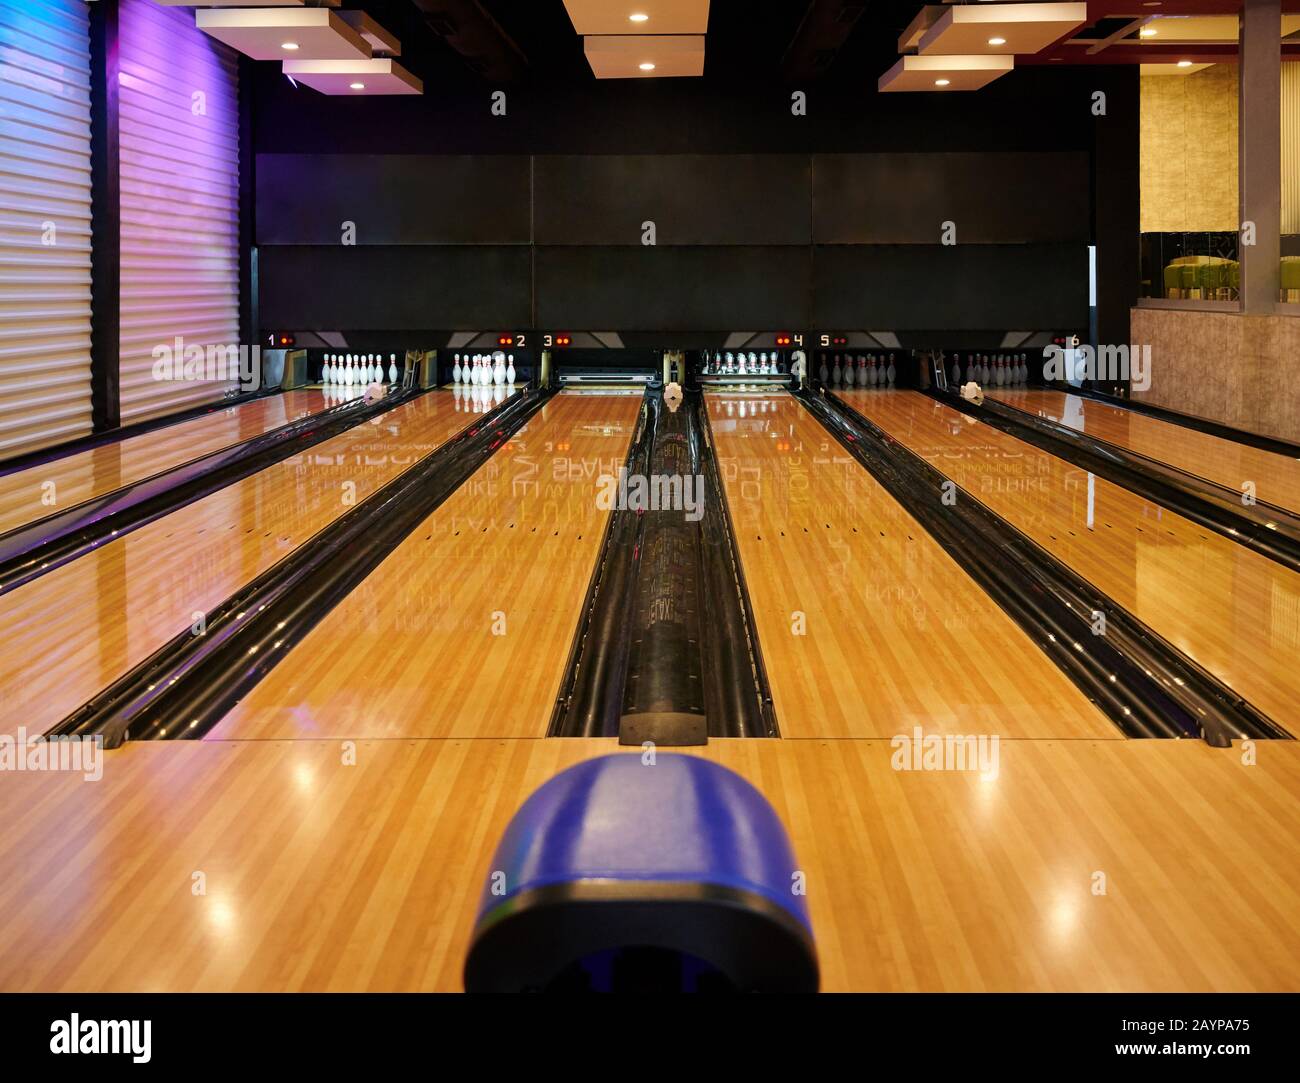 Bowling lanes in club. Empty bowling alley front view Stock Photo